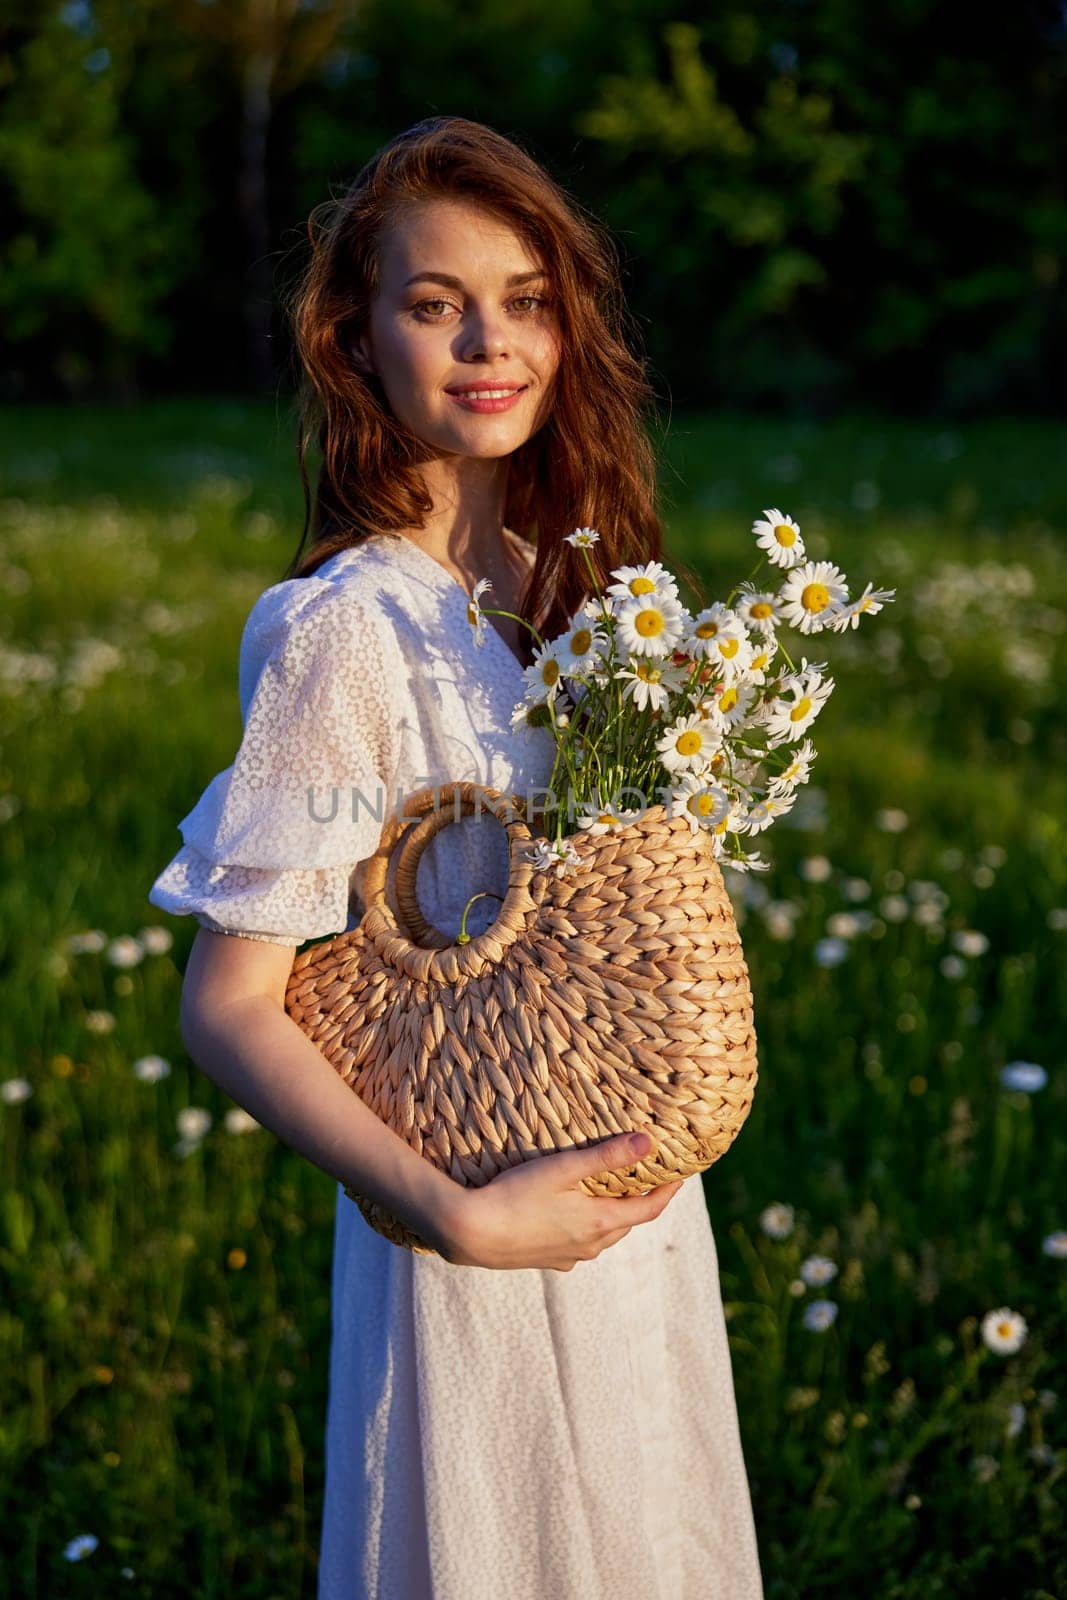 portrait of a beautiful red-haired girl in a light summer dress in nature with a basket of flowers. High quality photo